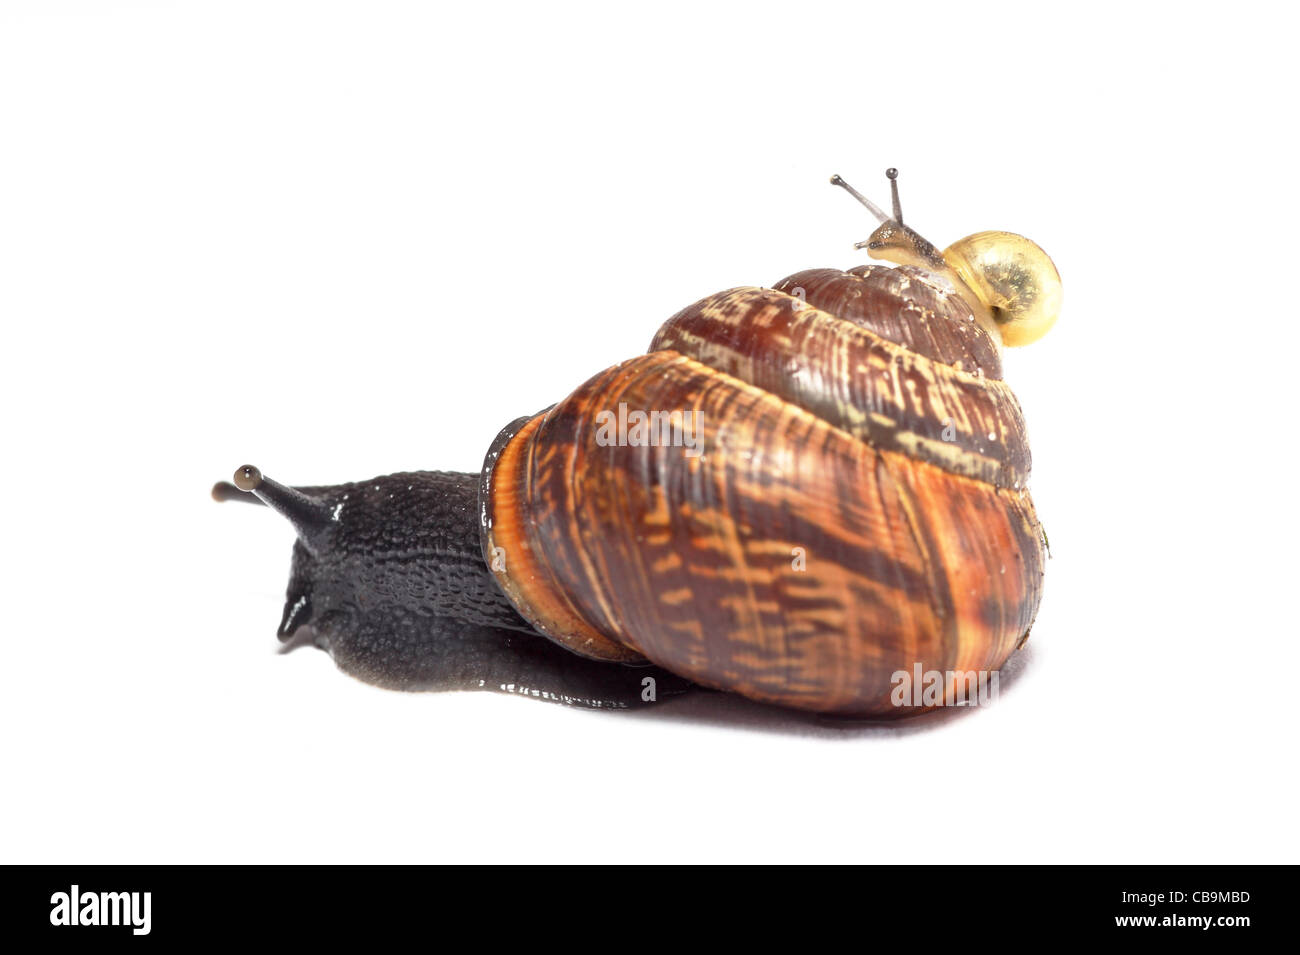 small snail riding on top of the house of a large snail Stock Photo